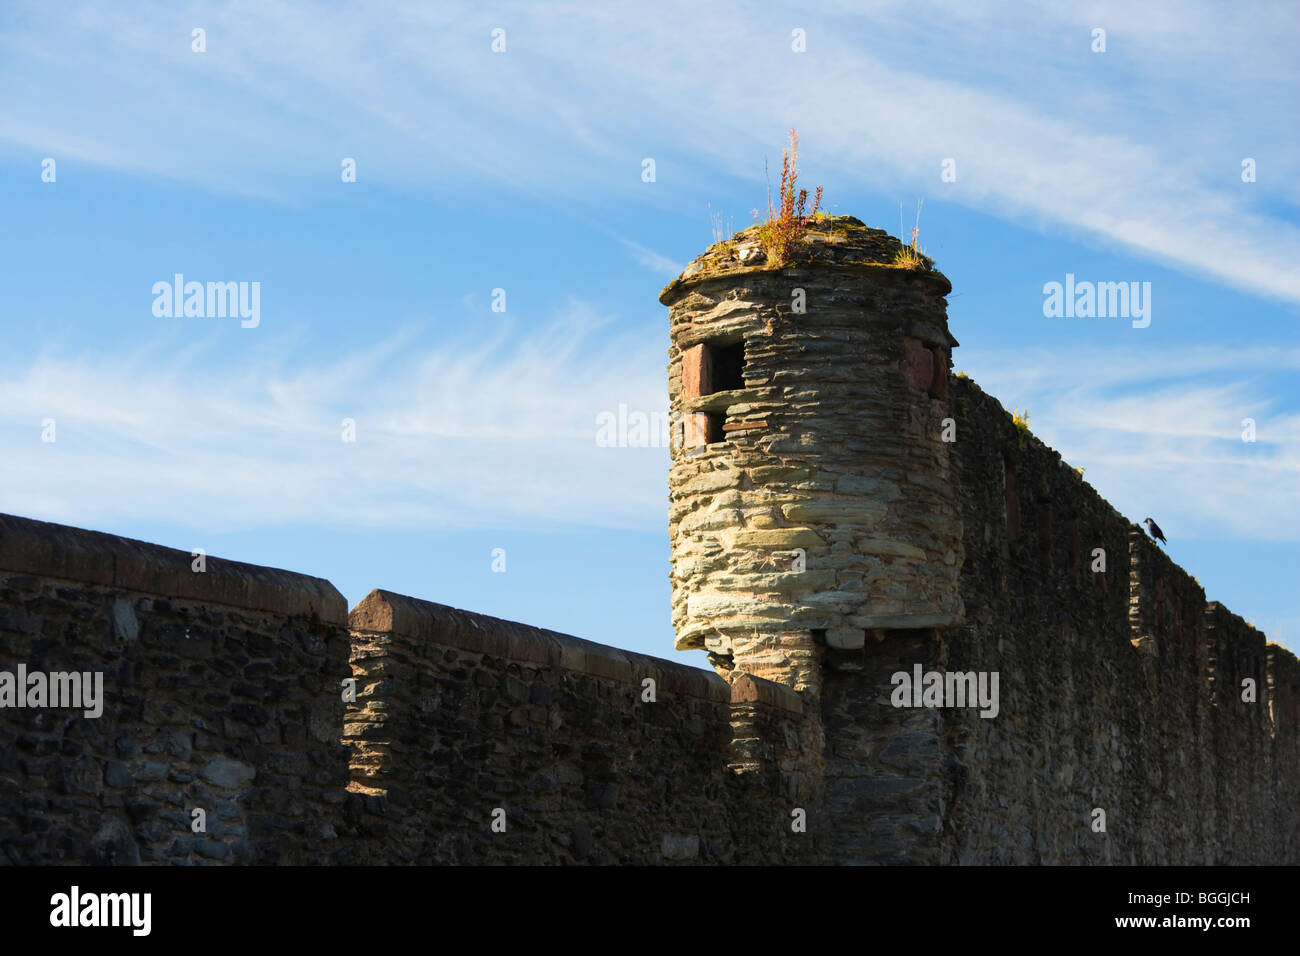 Lookout tower on the old town walls of Londonderrry, County Londnderry, Northern Ireland Stock Photo